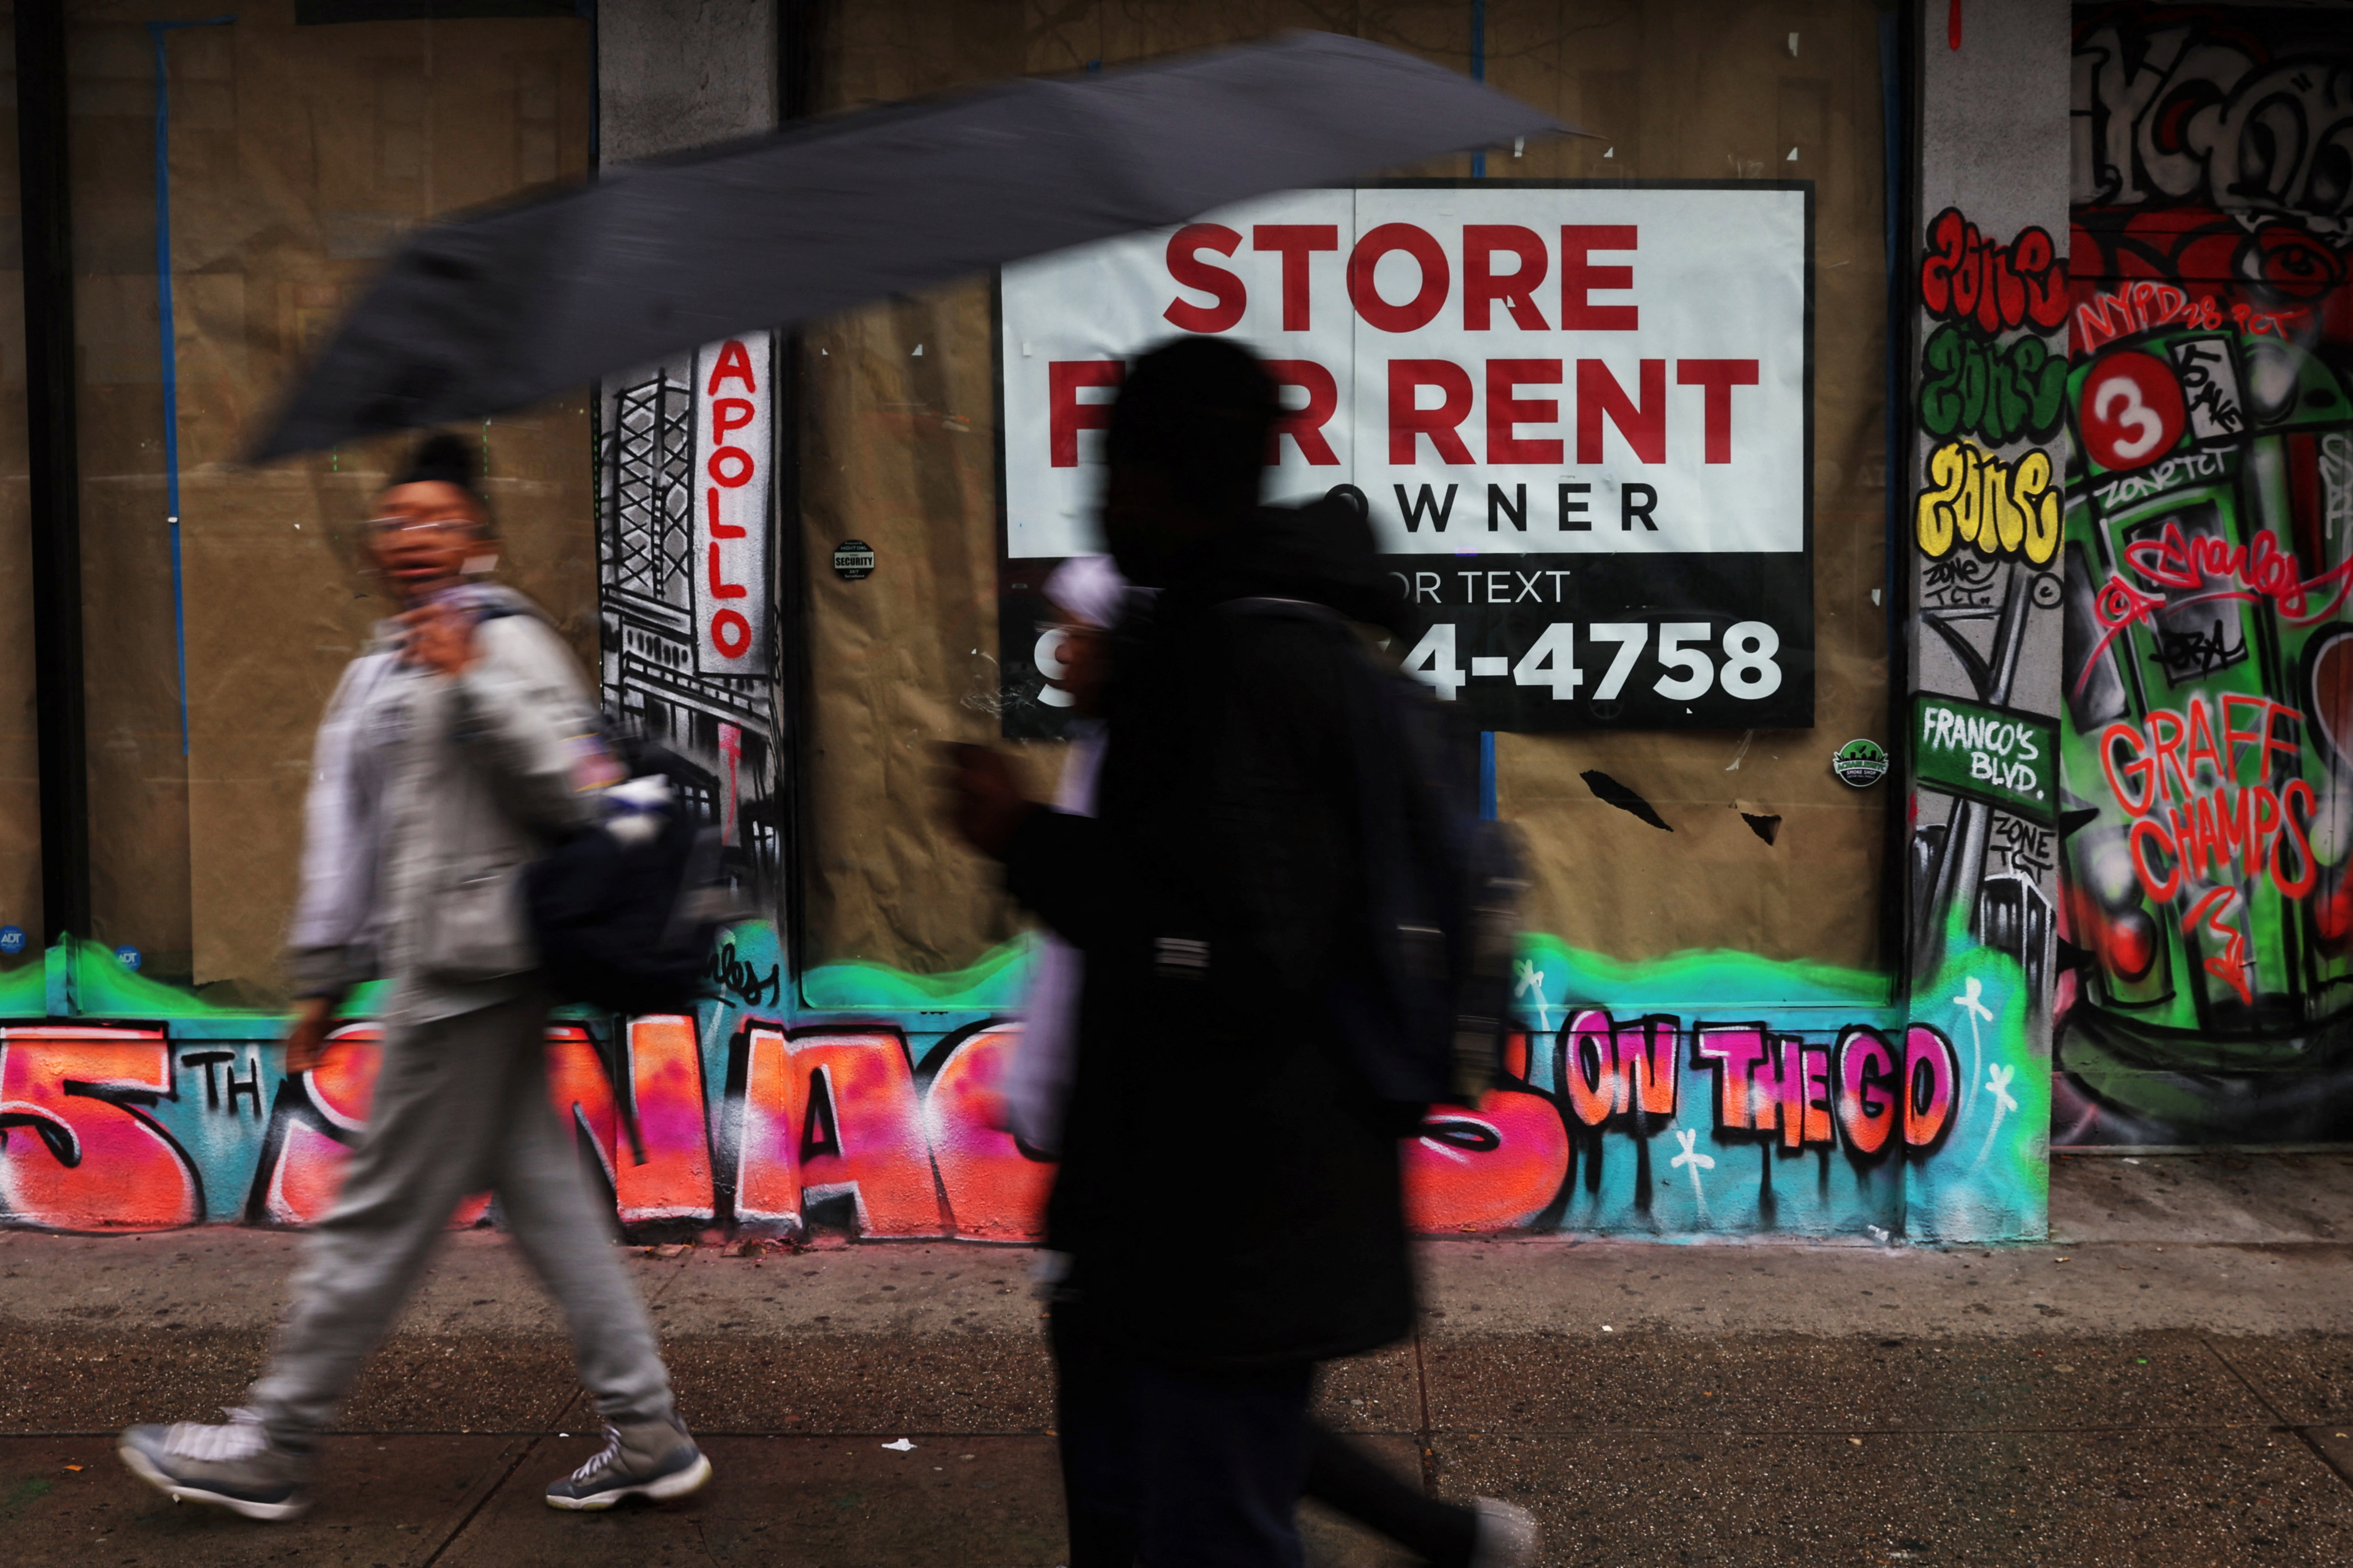 People walk in the rain by commercial real estate for rent along 125th street in the Harlem area of New York City